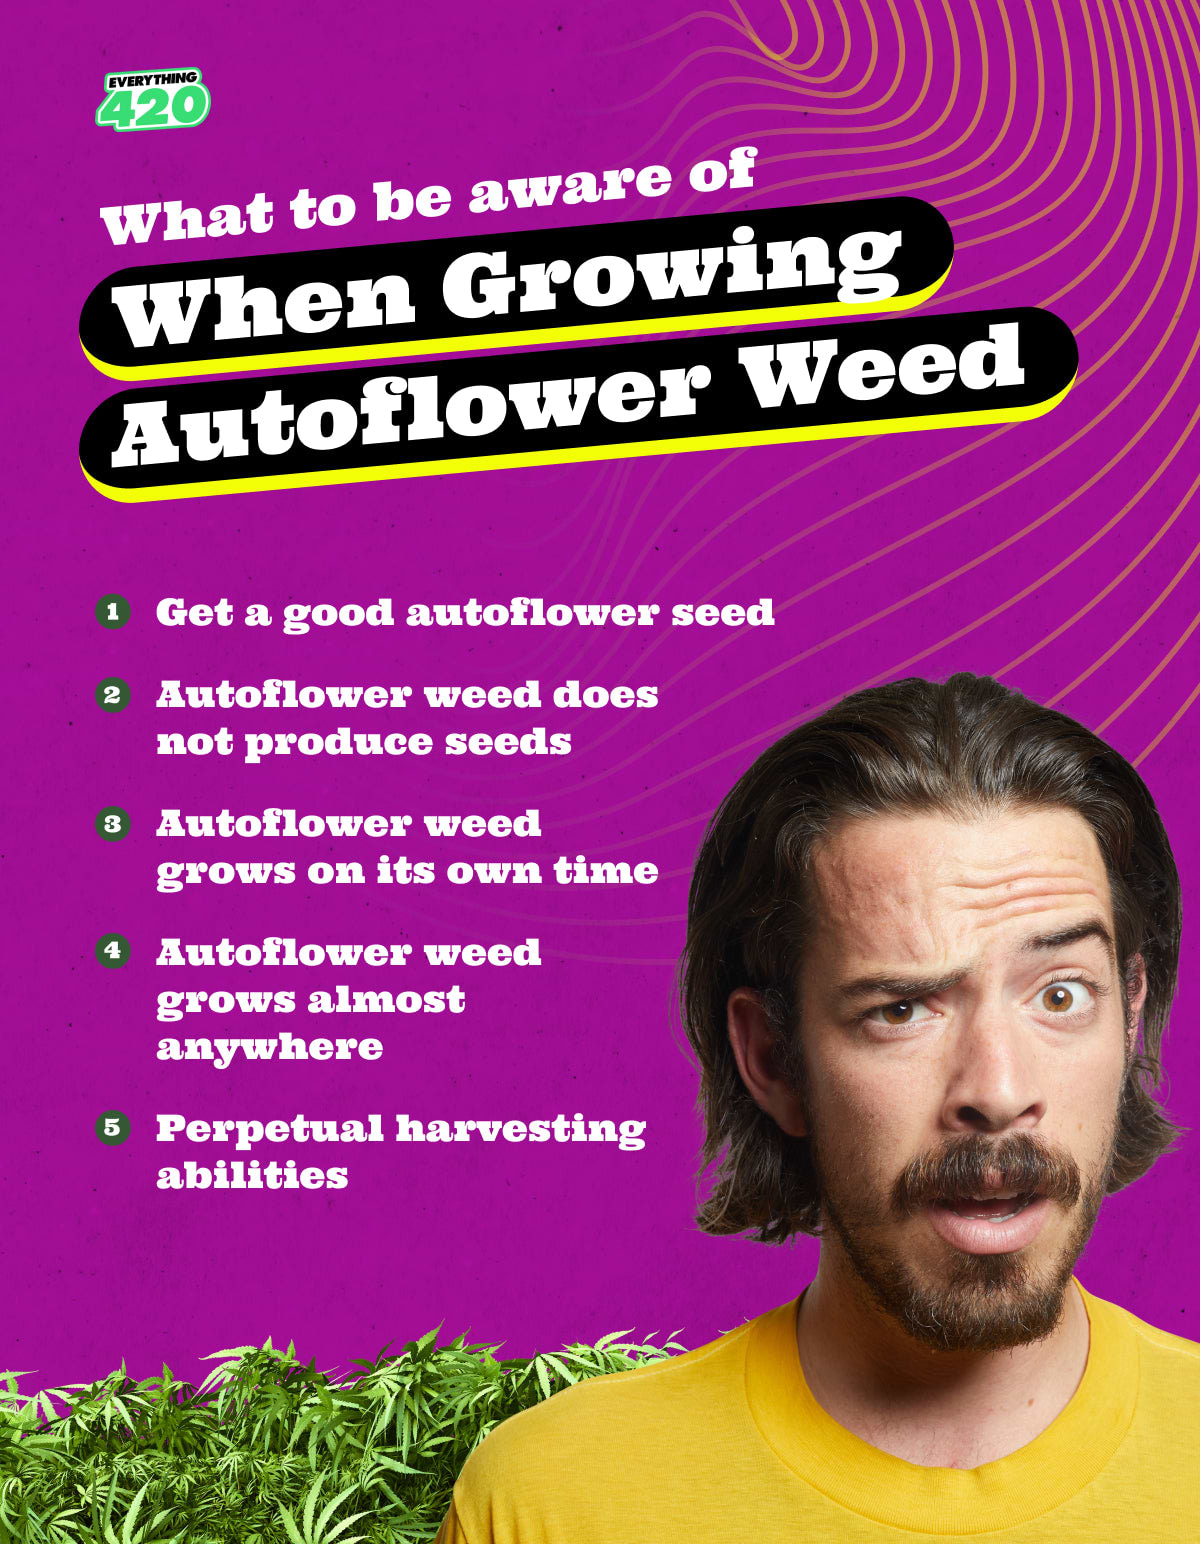 What to be aware of when growing autoflower weed